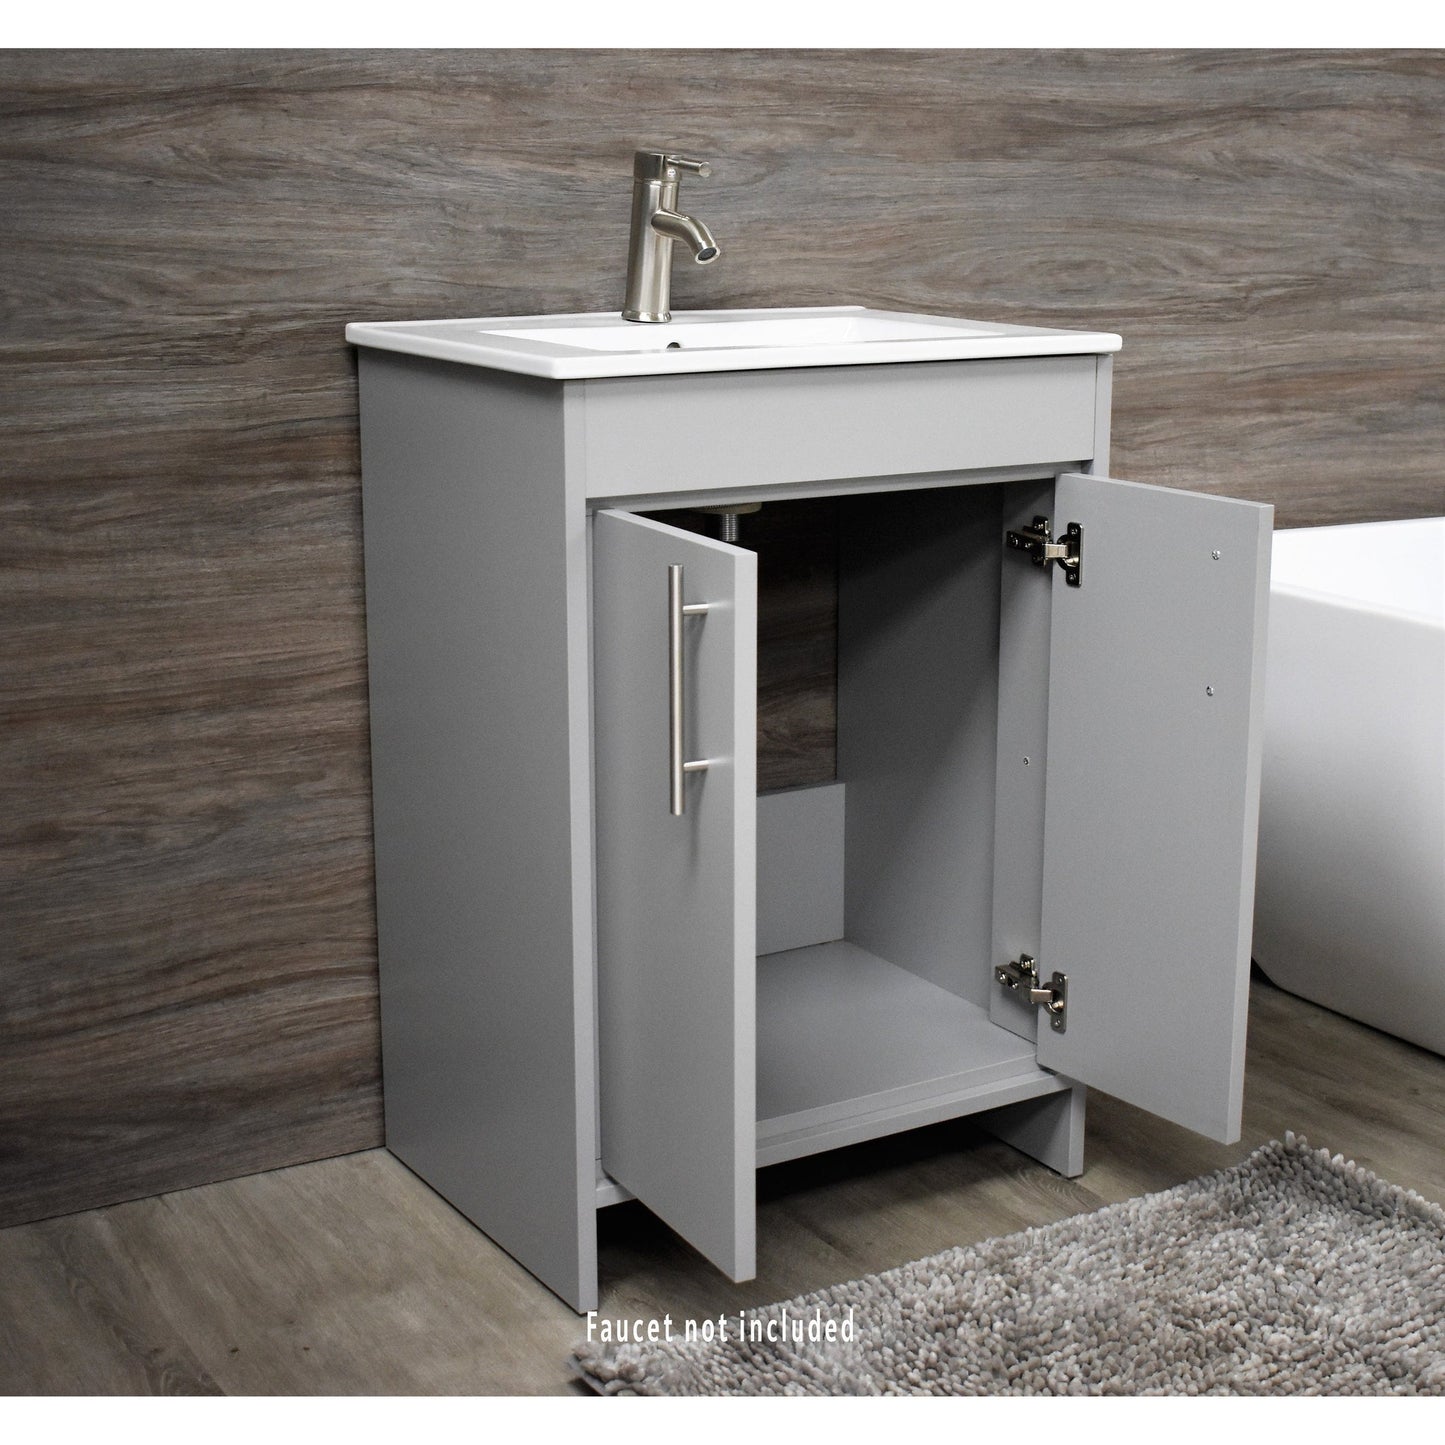 Volpa USA Villa 30" Gray Freestanding Modern Bathroom Vanity With Integrated Ceramic Top and Brushed Nickel Round Handles